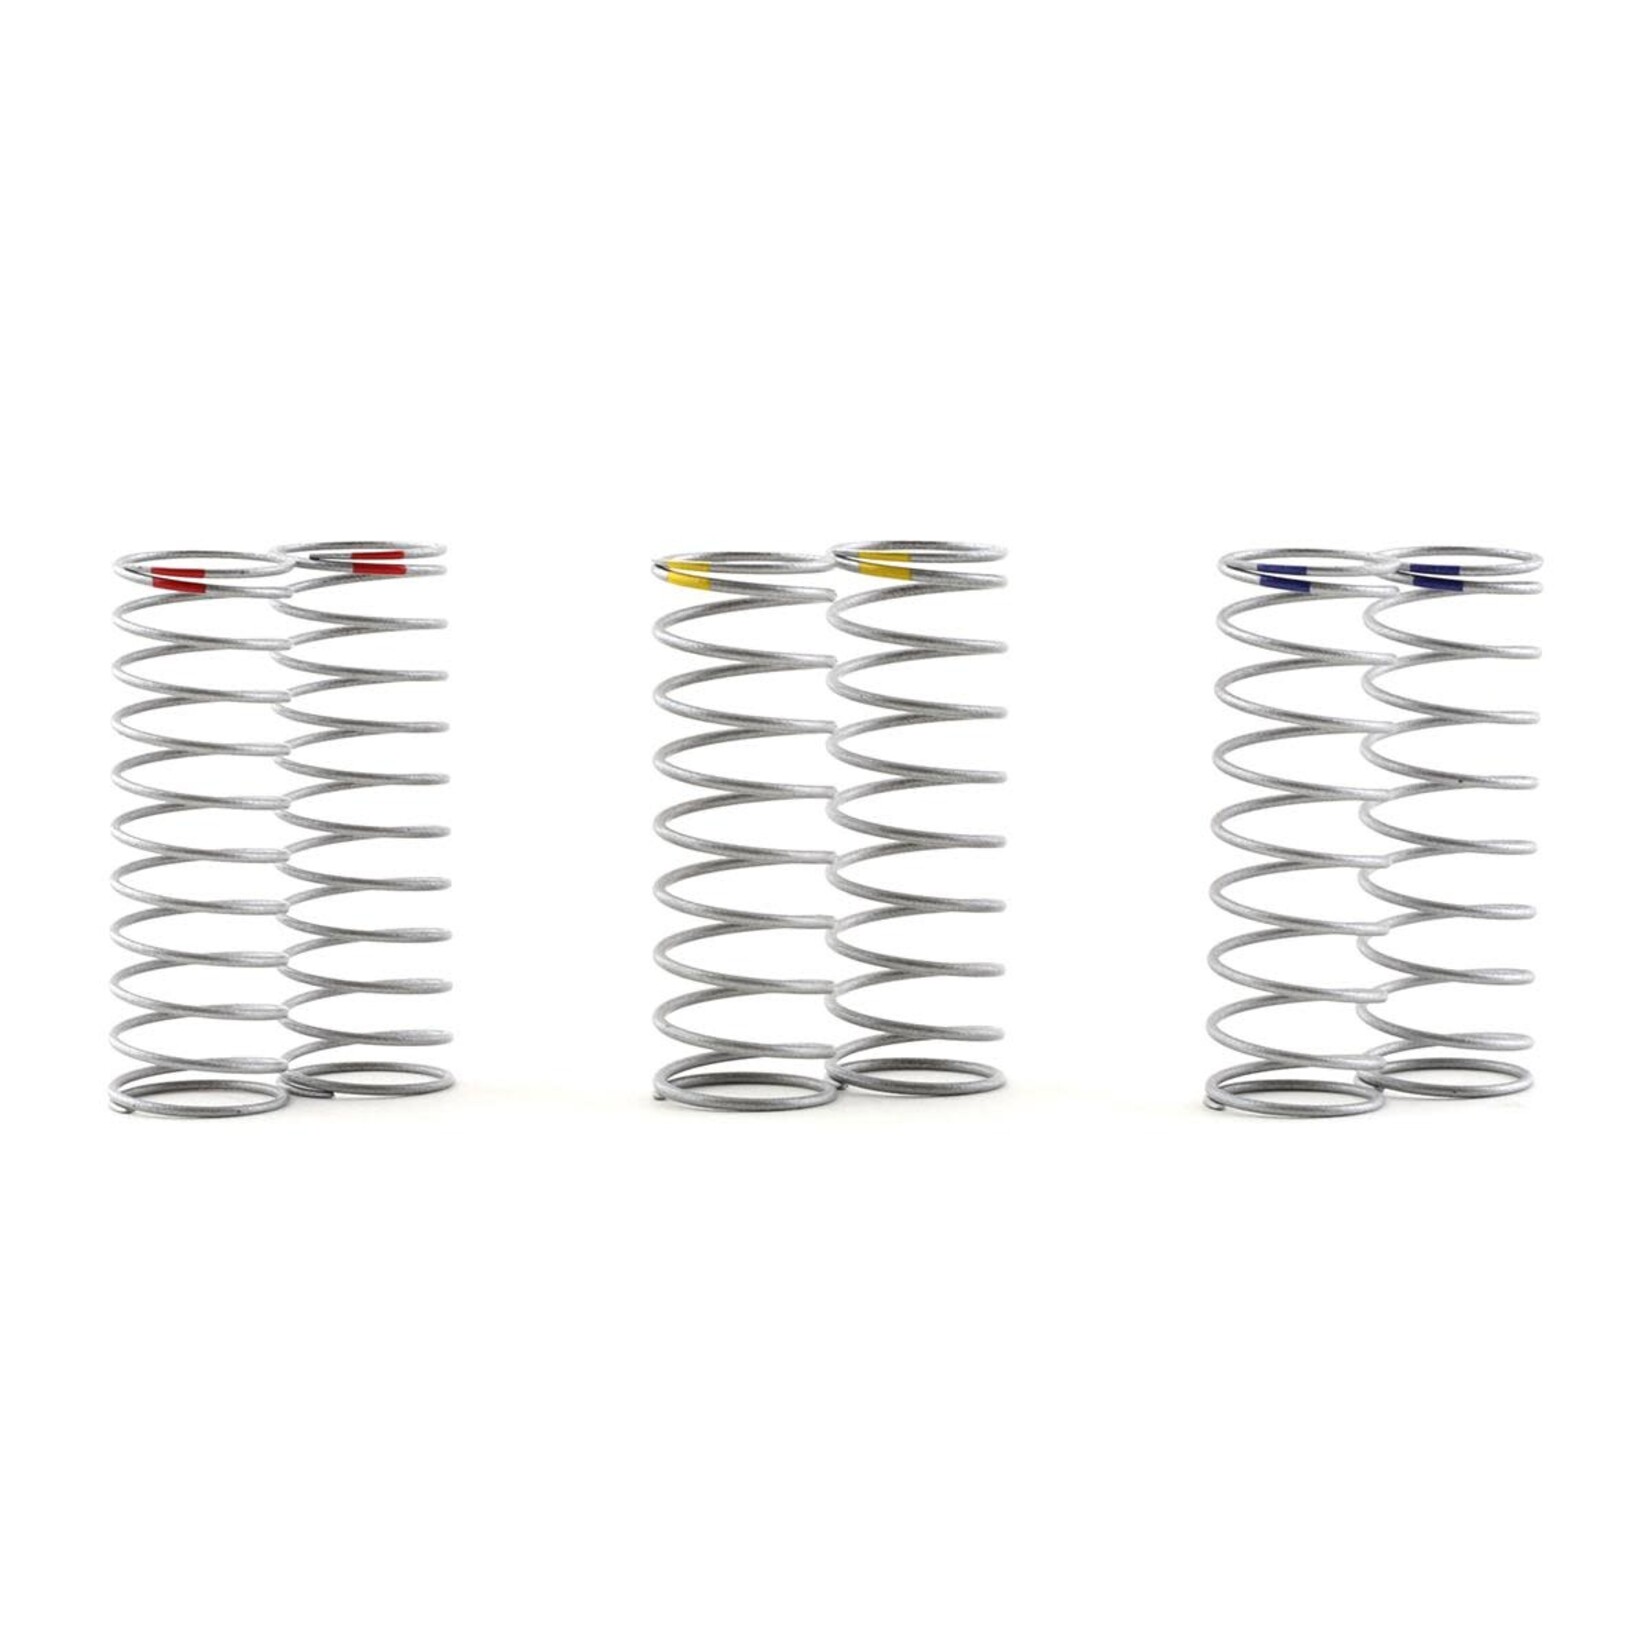 Incision Incision S8E 90mm Shock Spring Tuning Set (6) #IRC00513